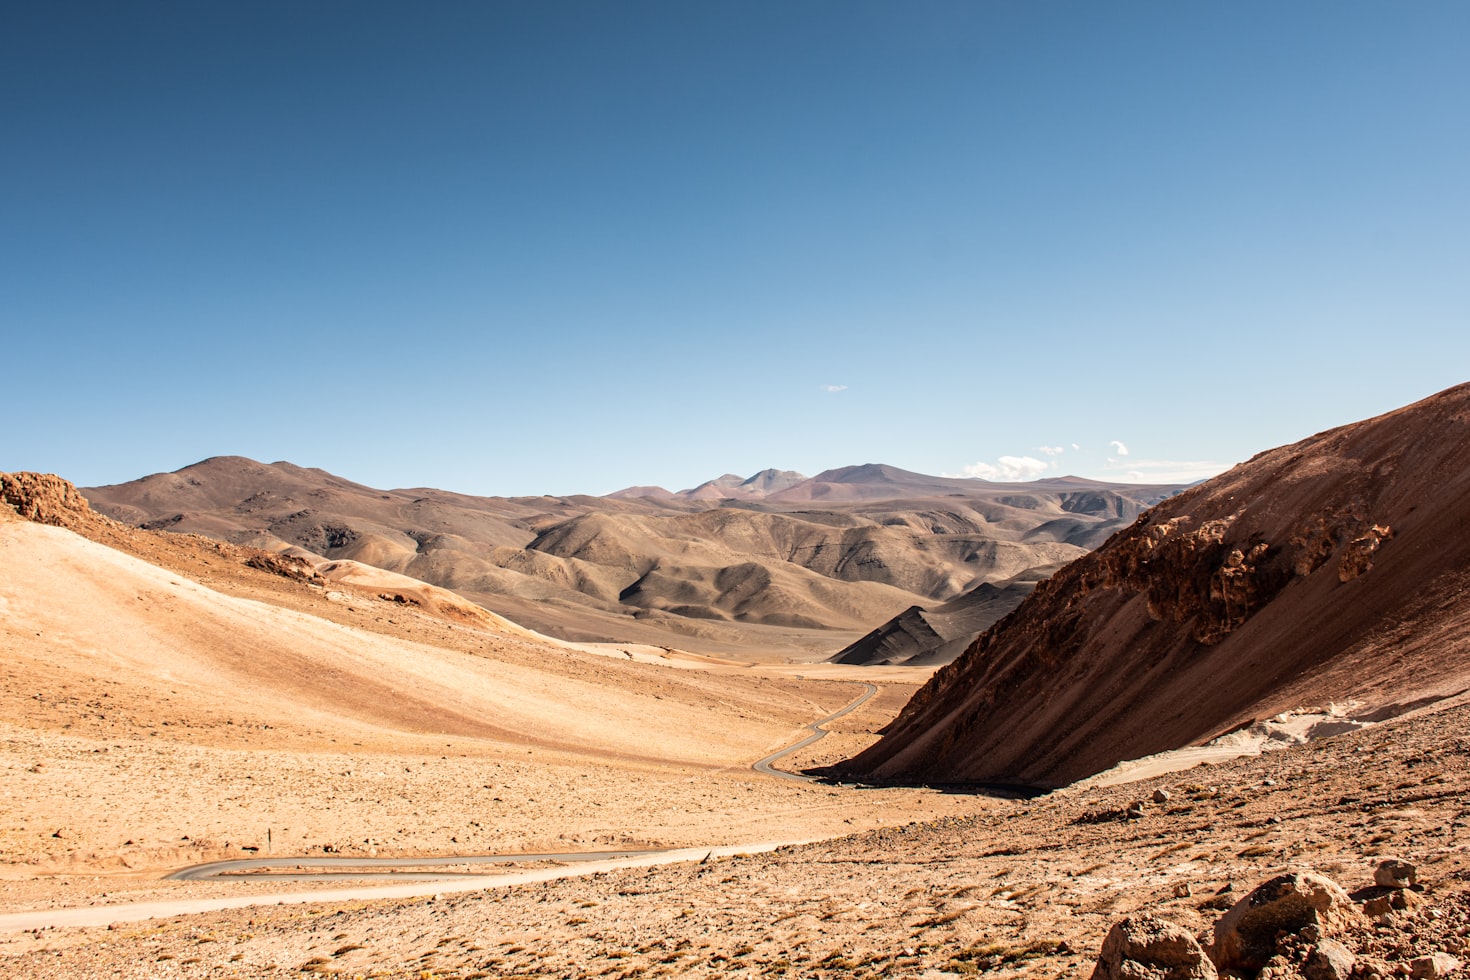 The longest recorded drought in the world was in the Atacama Desert in Chile